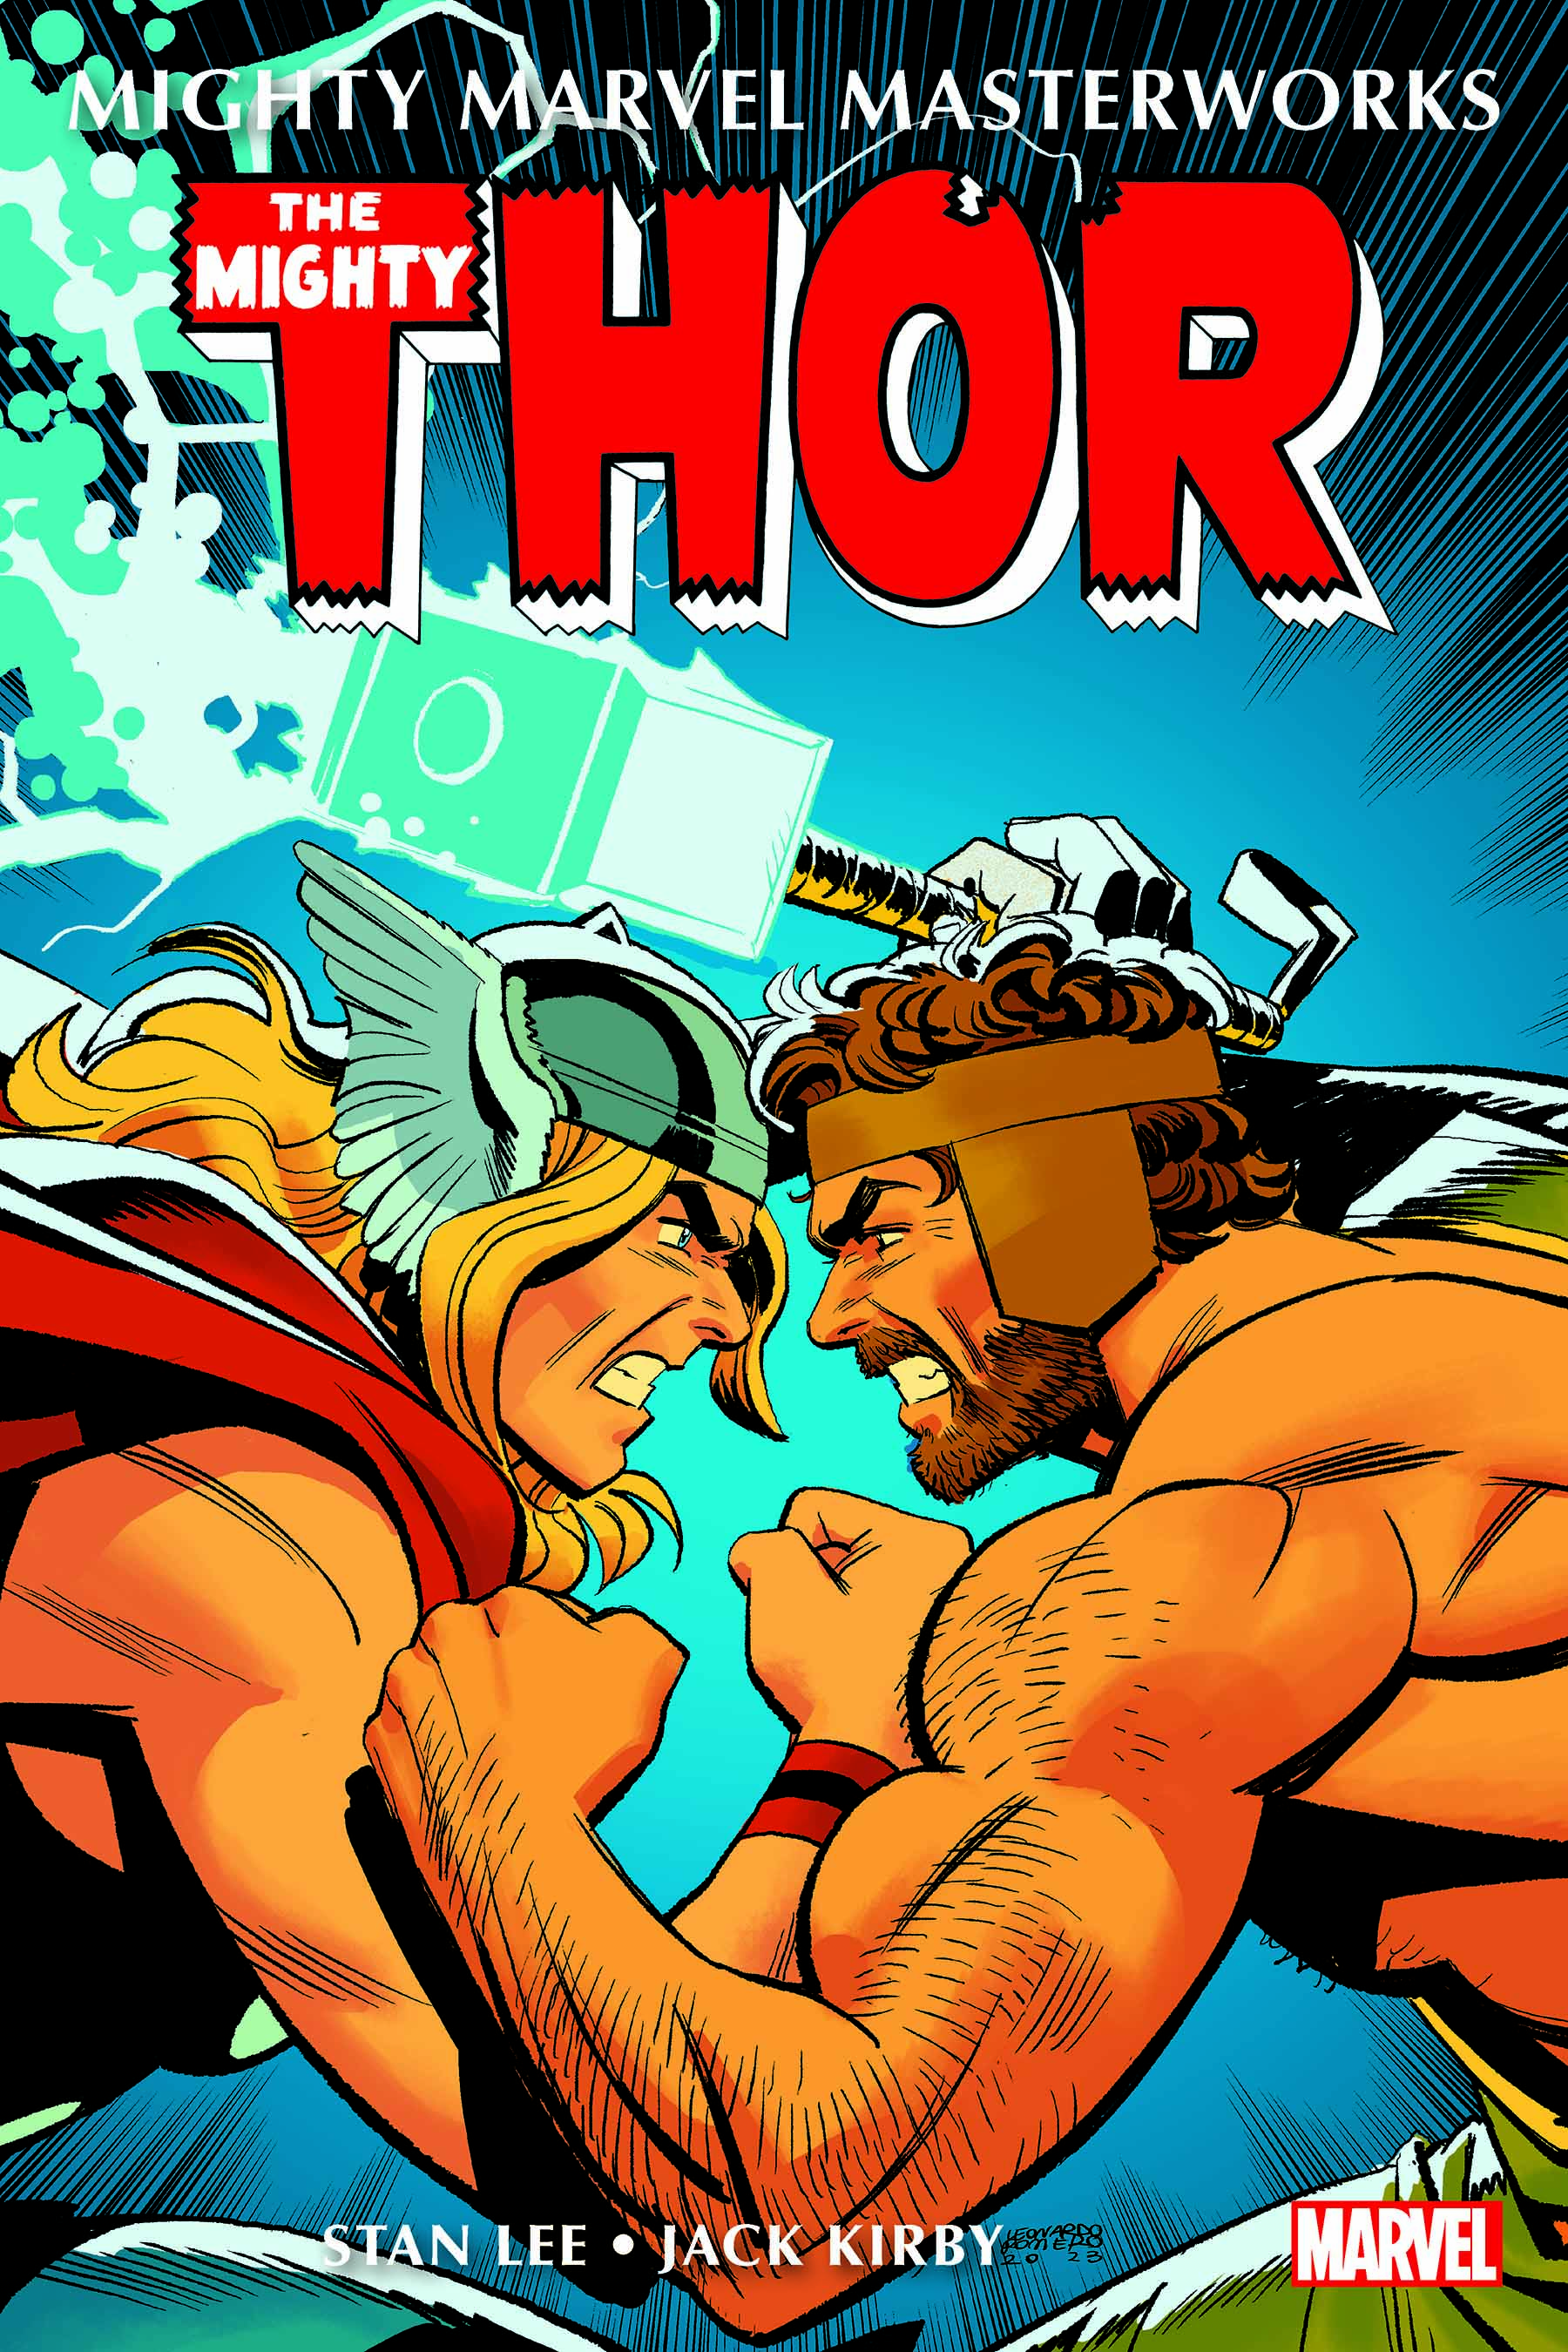 MIGHTY MARVEL MASTERWORKS: THE MIGHTY THOR VOL. 4 - WHEN MEET THE IMMORTALS GN-TPB ROMERO COVER (Trade Paperback)